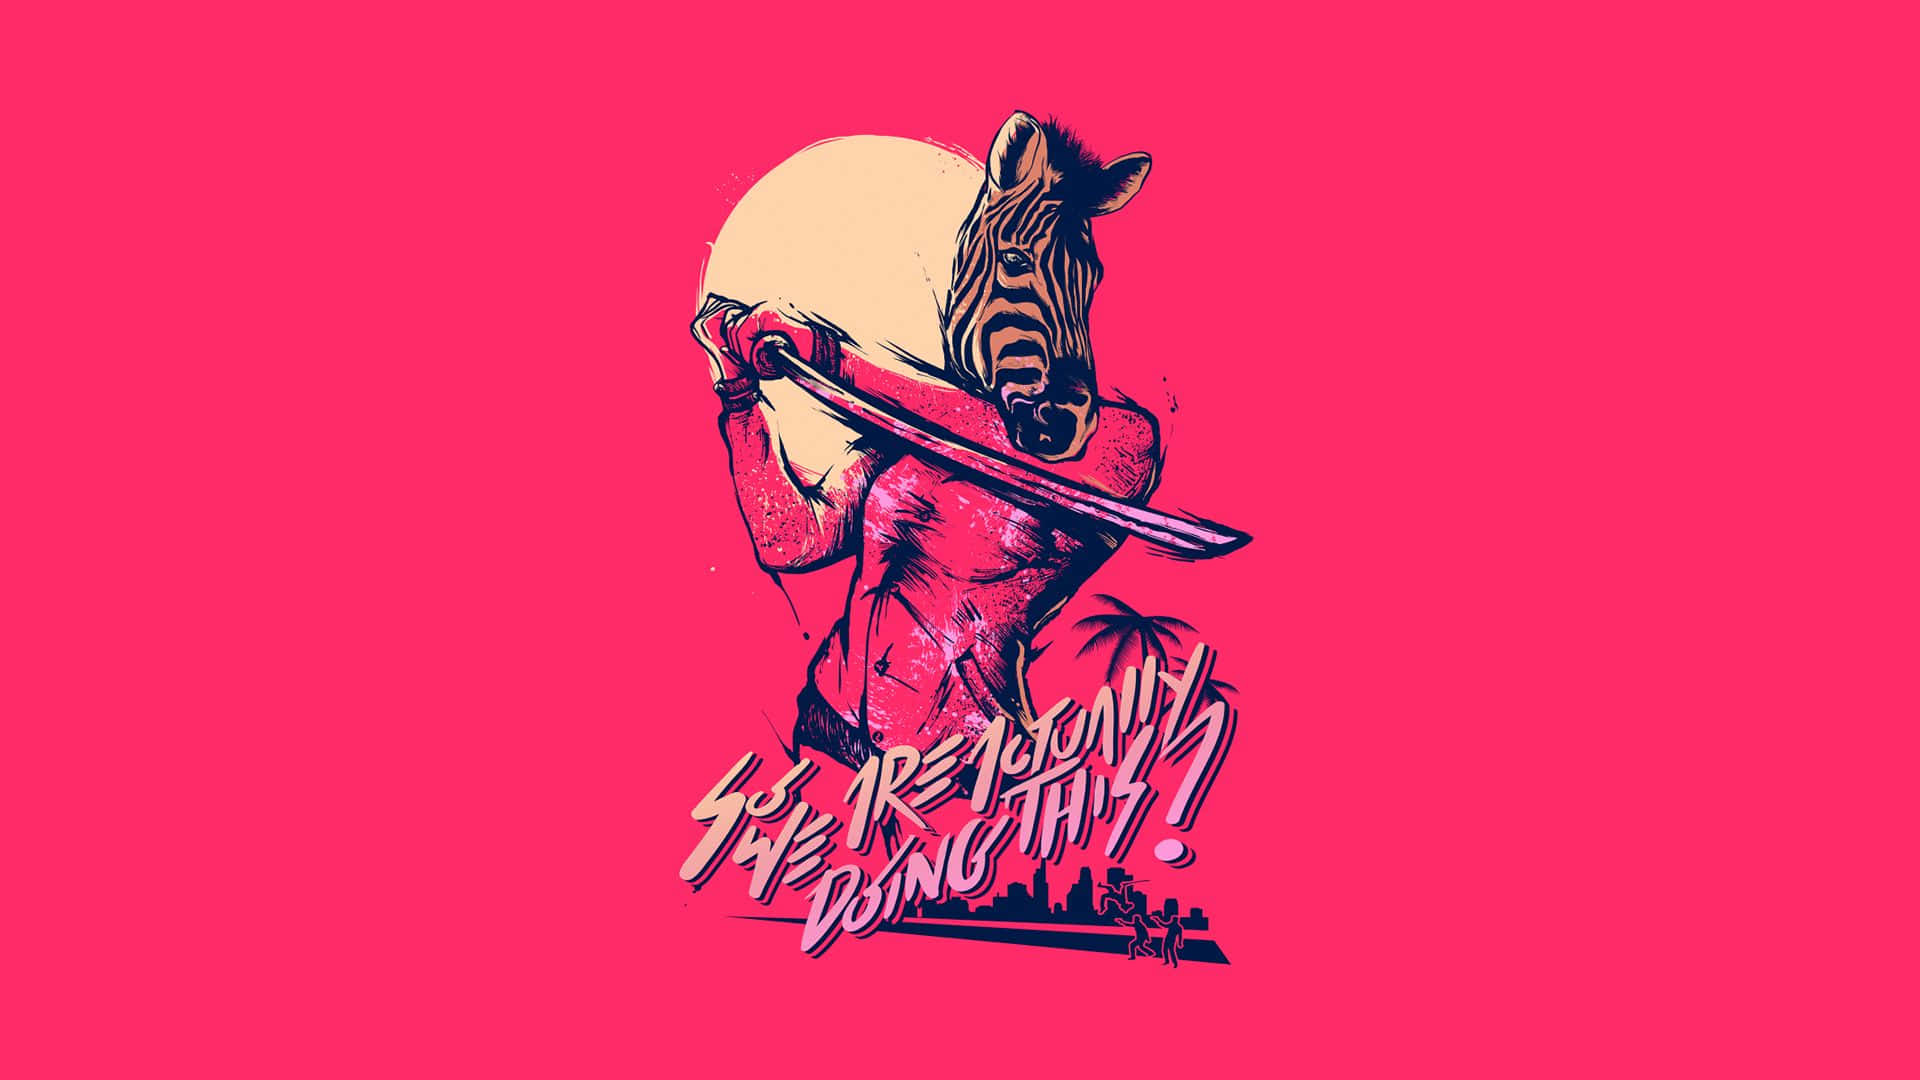 Intense action in the world of Hotline Miami